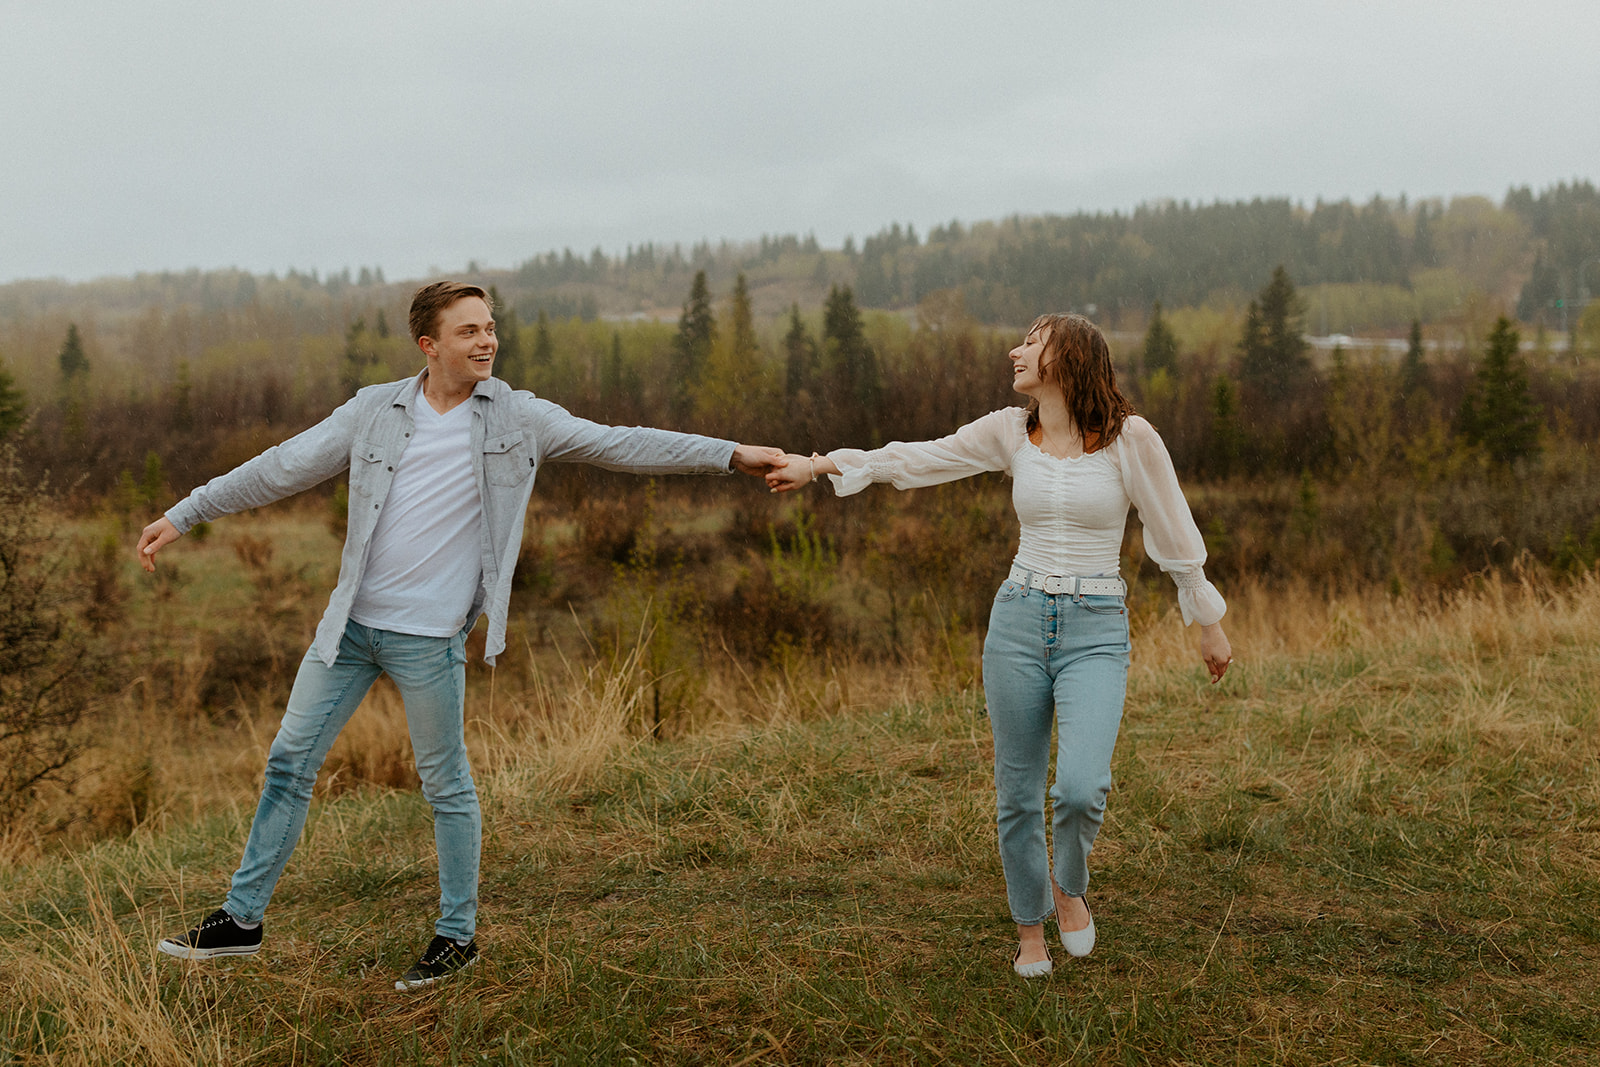 Newly engaged couple play around in the rain during this impossibly cute rainy day session